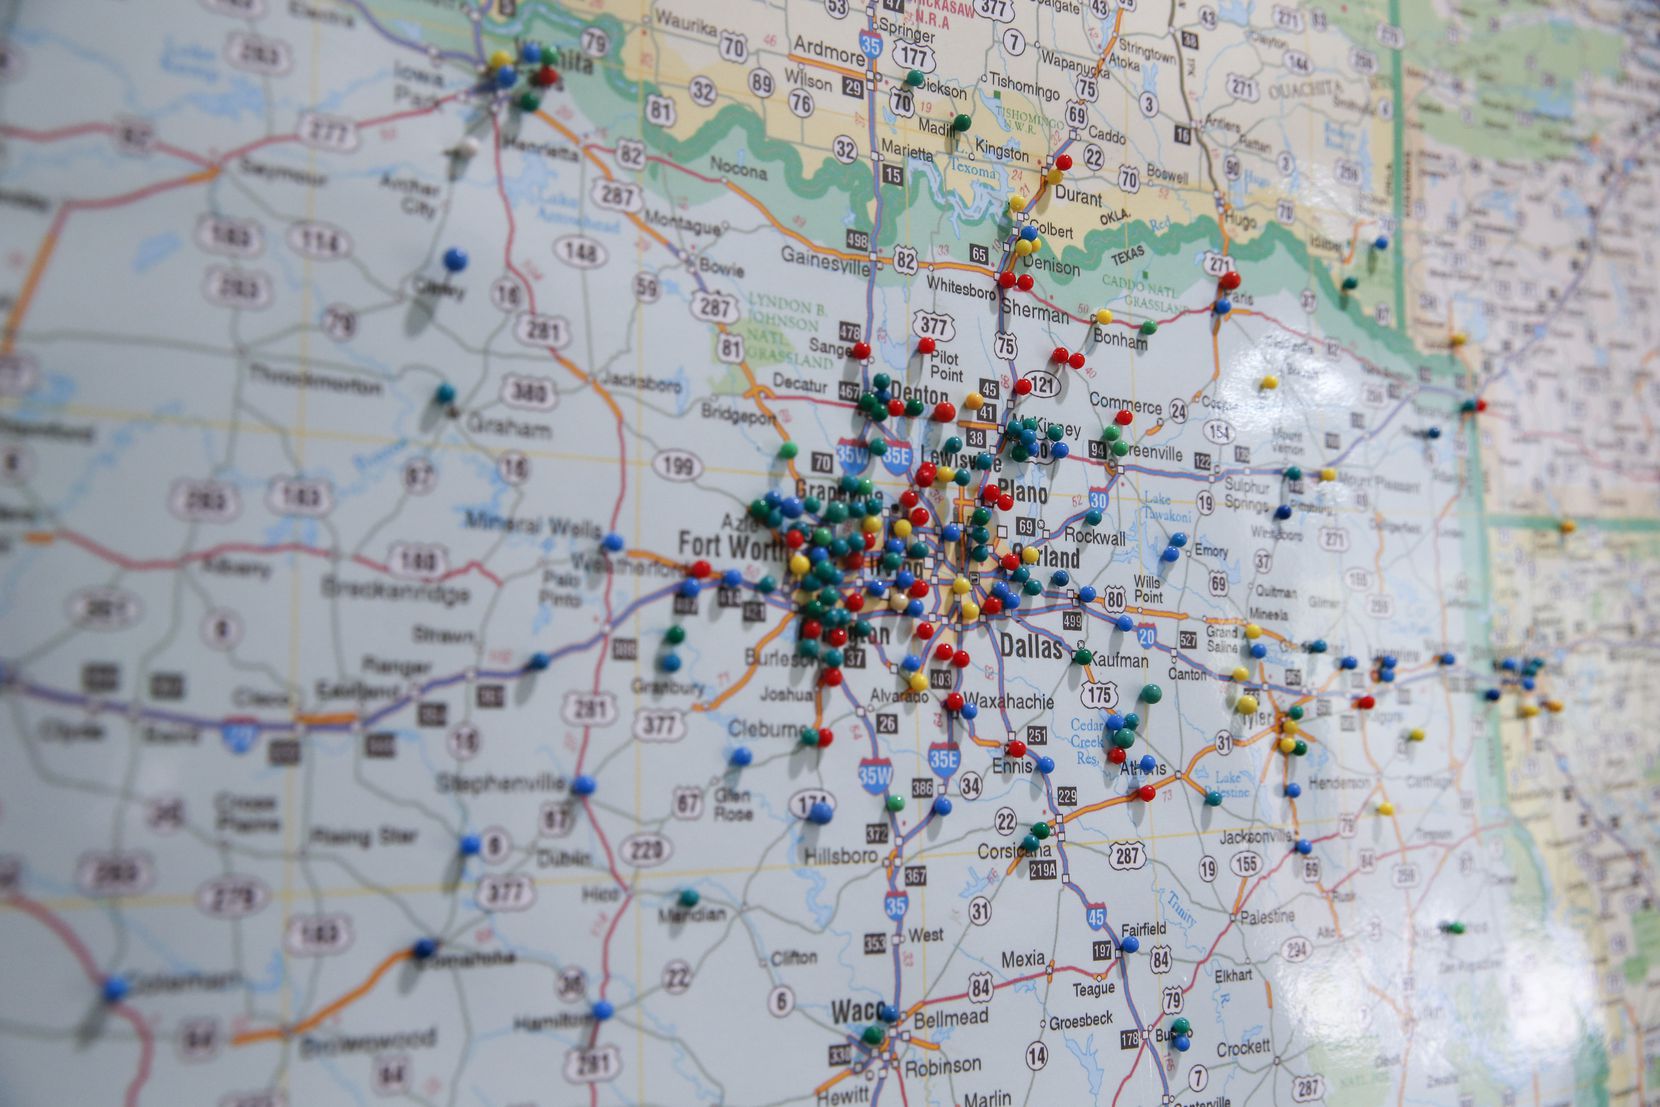 Pins on a map show where Mosaic Prosthetics' customers come from.